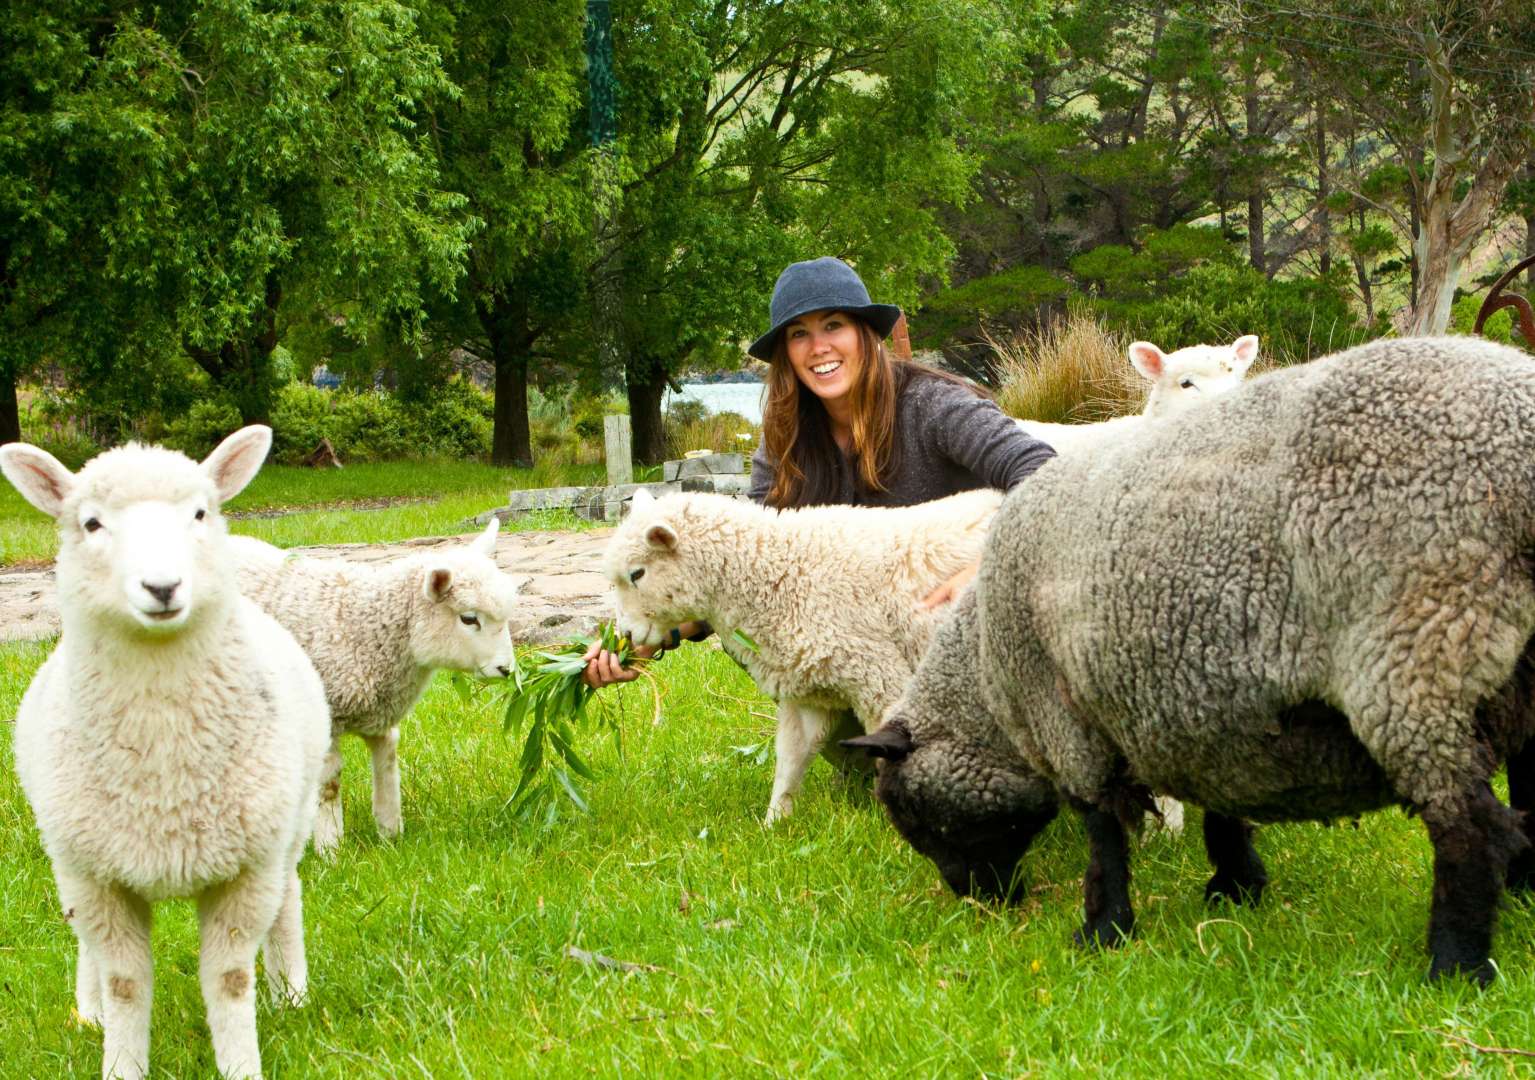 Visit Sheep and Other Wildlife